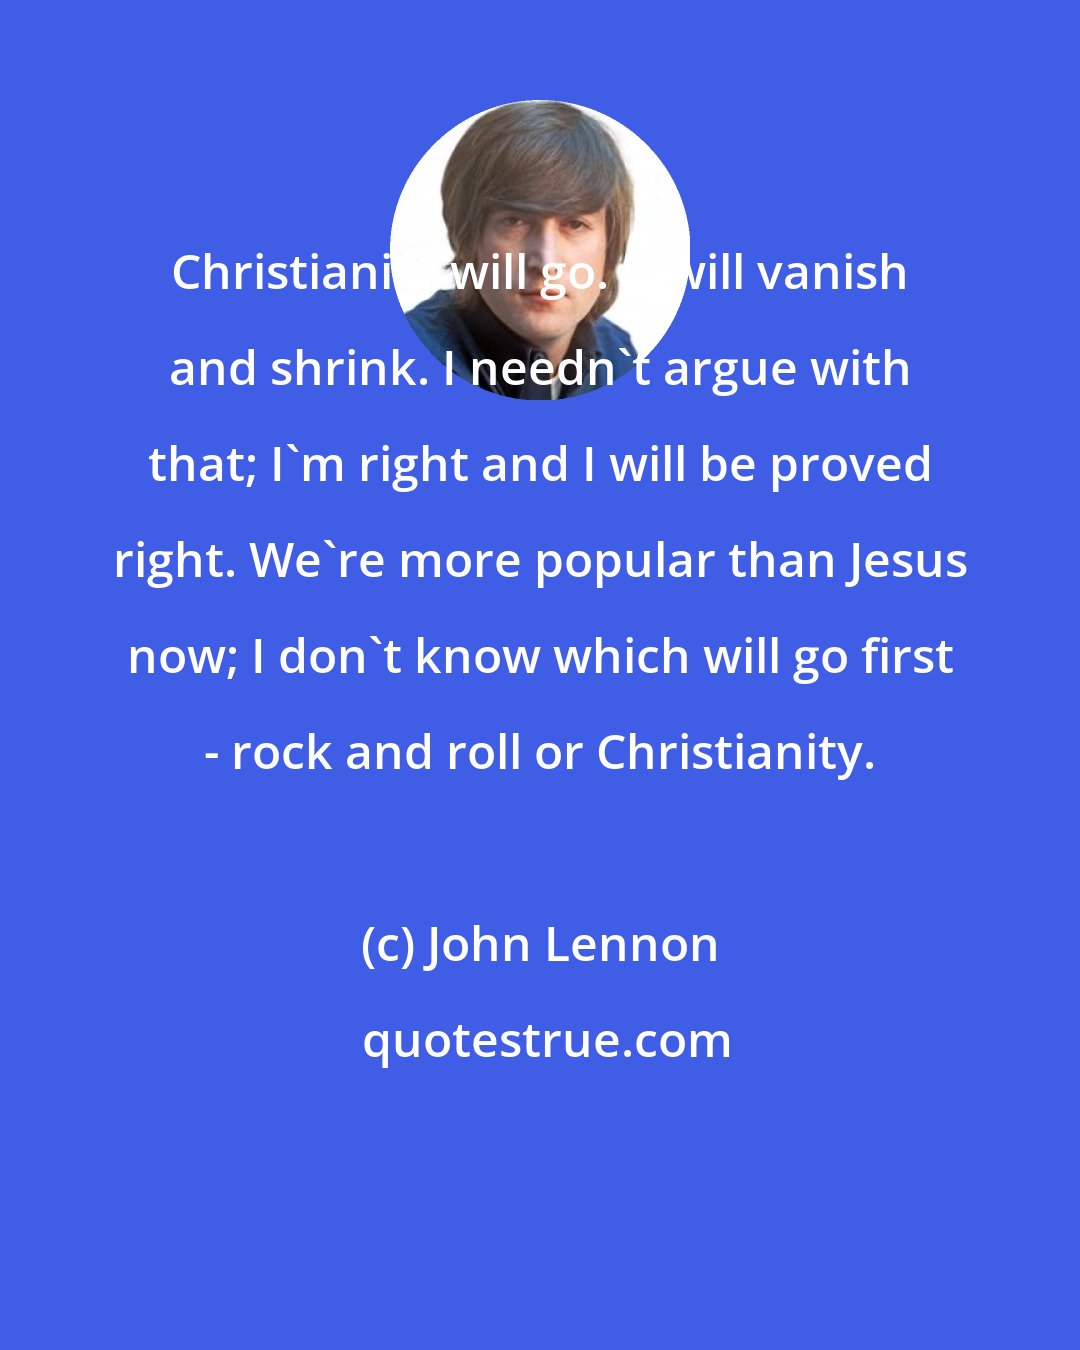 John Lennon: Christianity will go. It will vanish and shrink. I needn't argue with that; I'm right and I will be proved right. We're more popular than Jesus now; I don't know which will go first - rock and roll or Christianity.